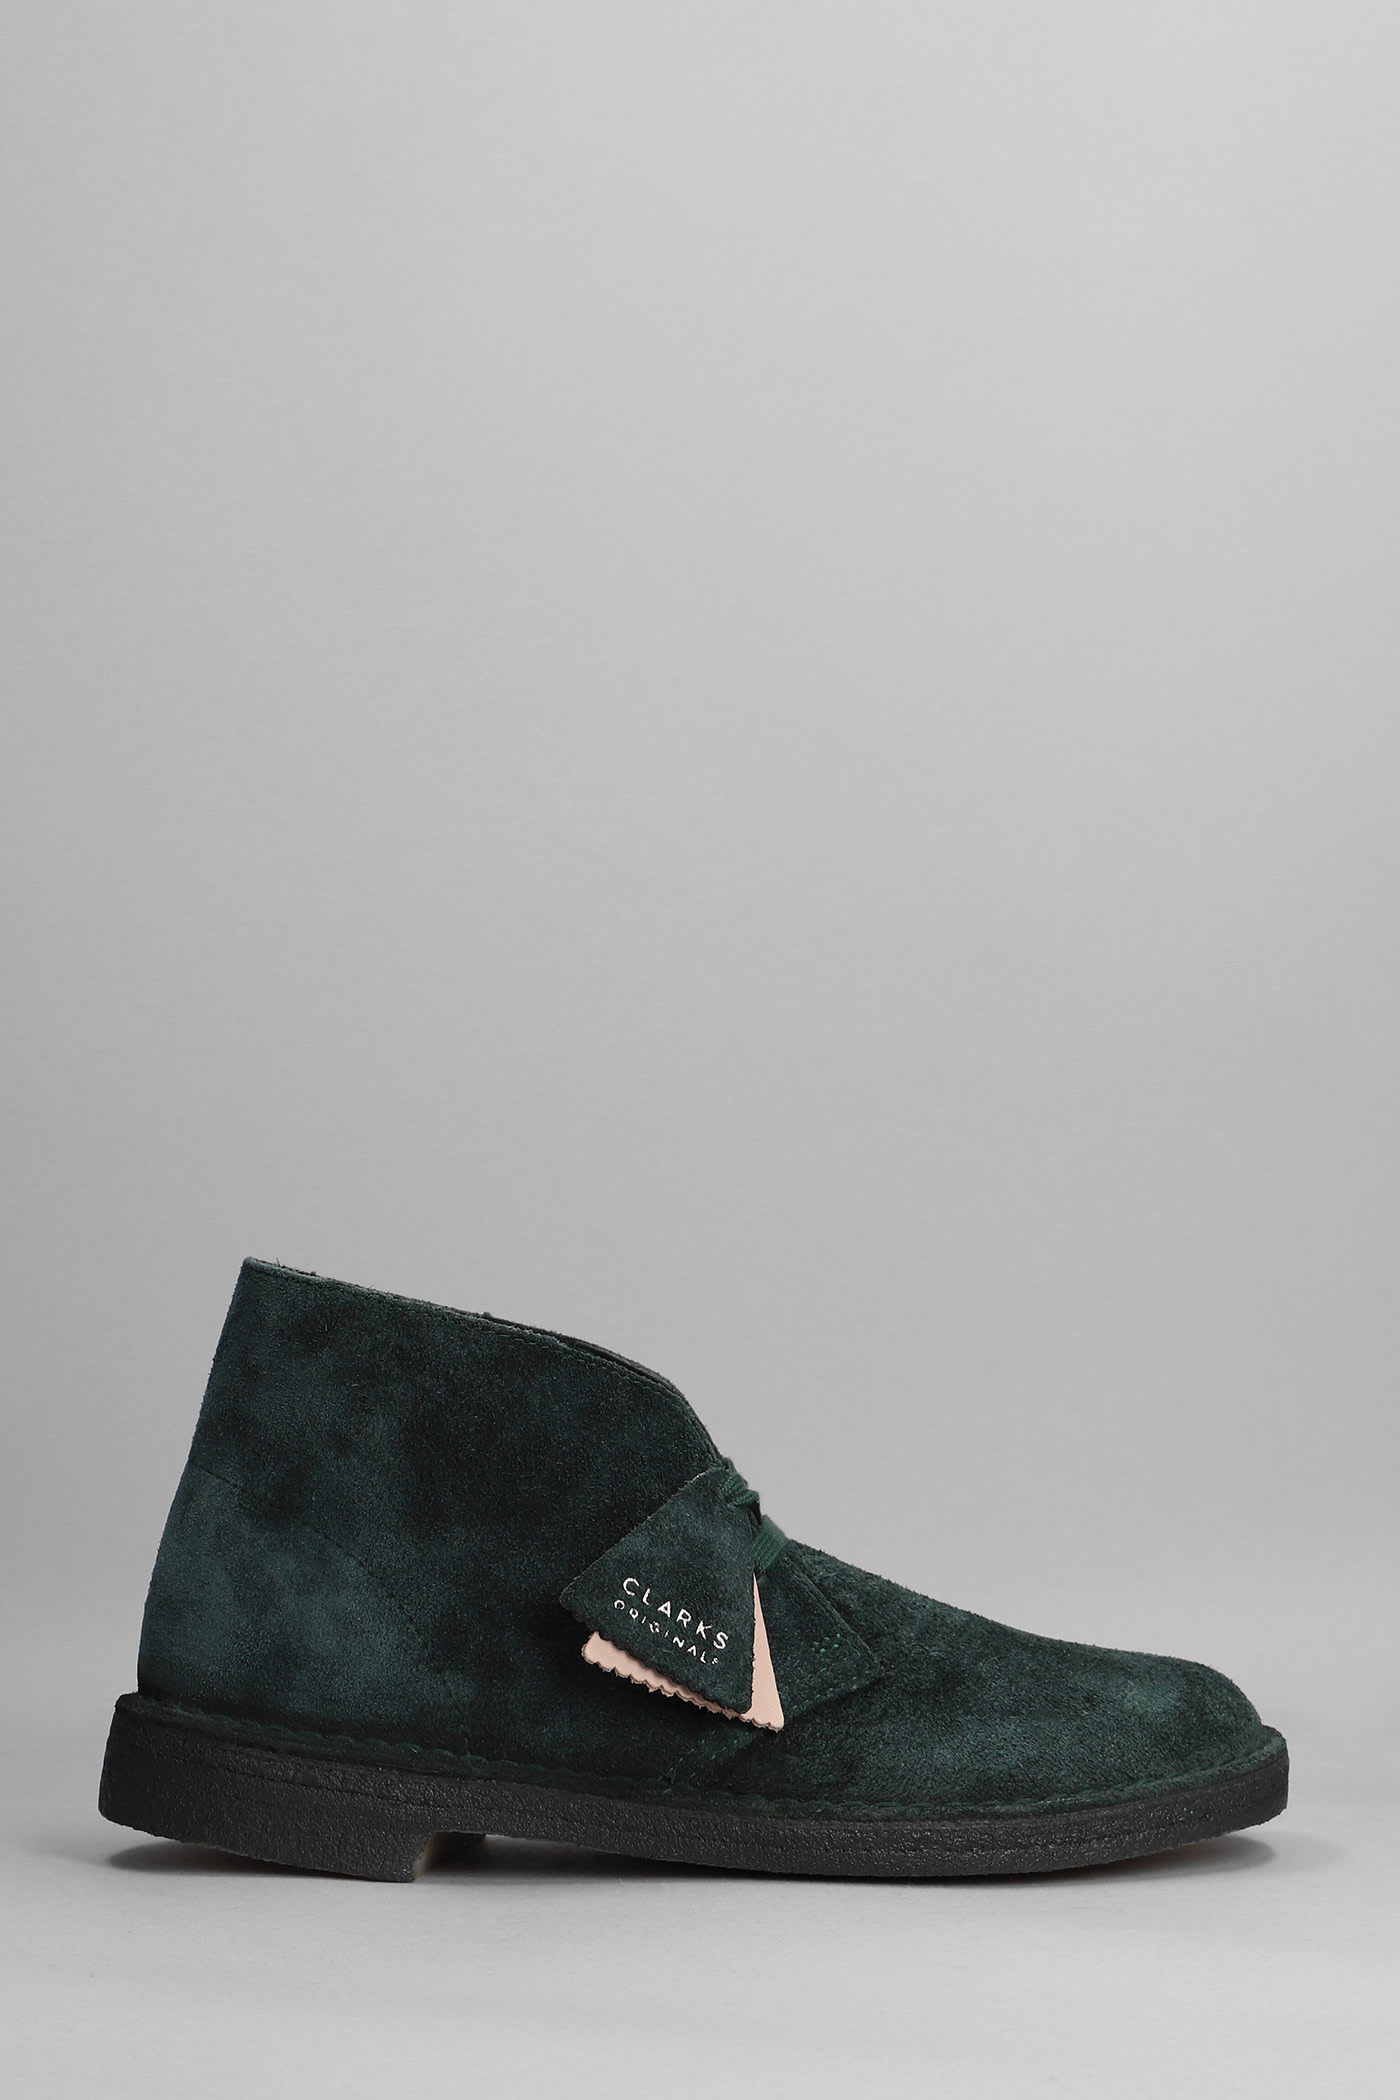 CLARKS DESERT BOOT LACE UP SHOES IN GREEN SUEDE